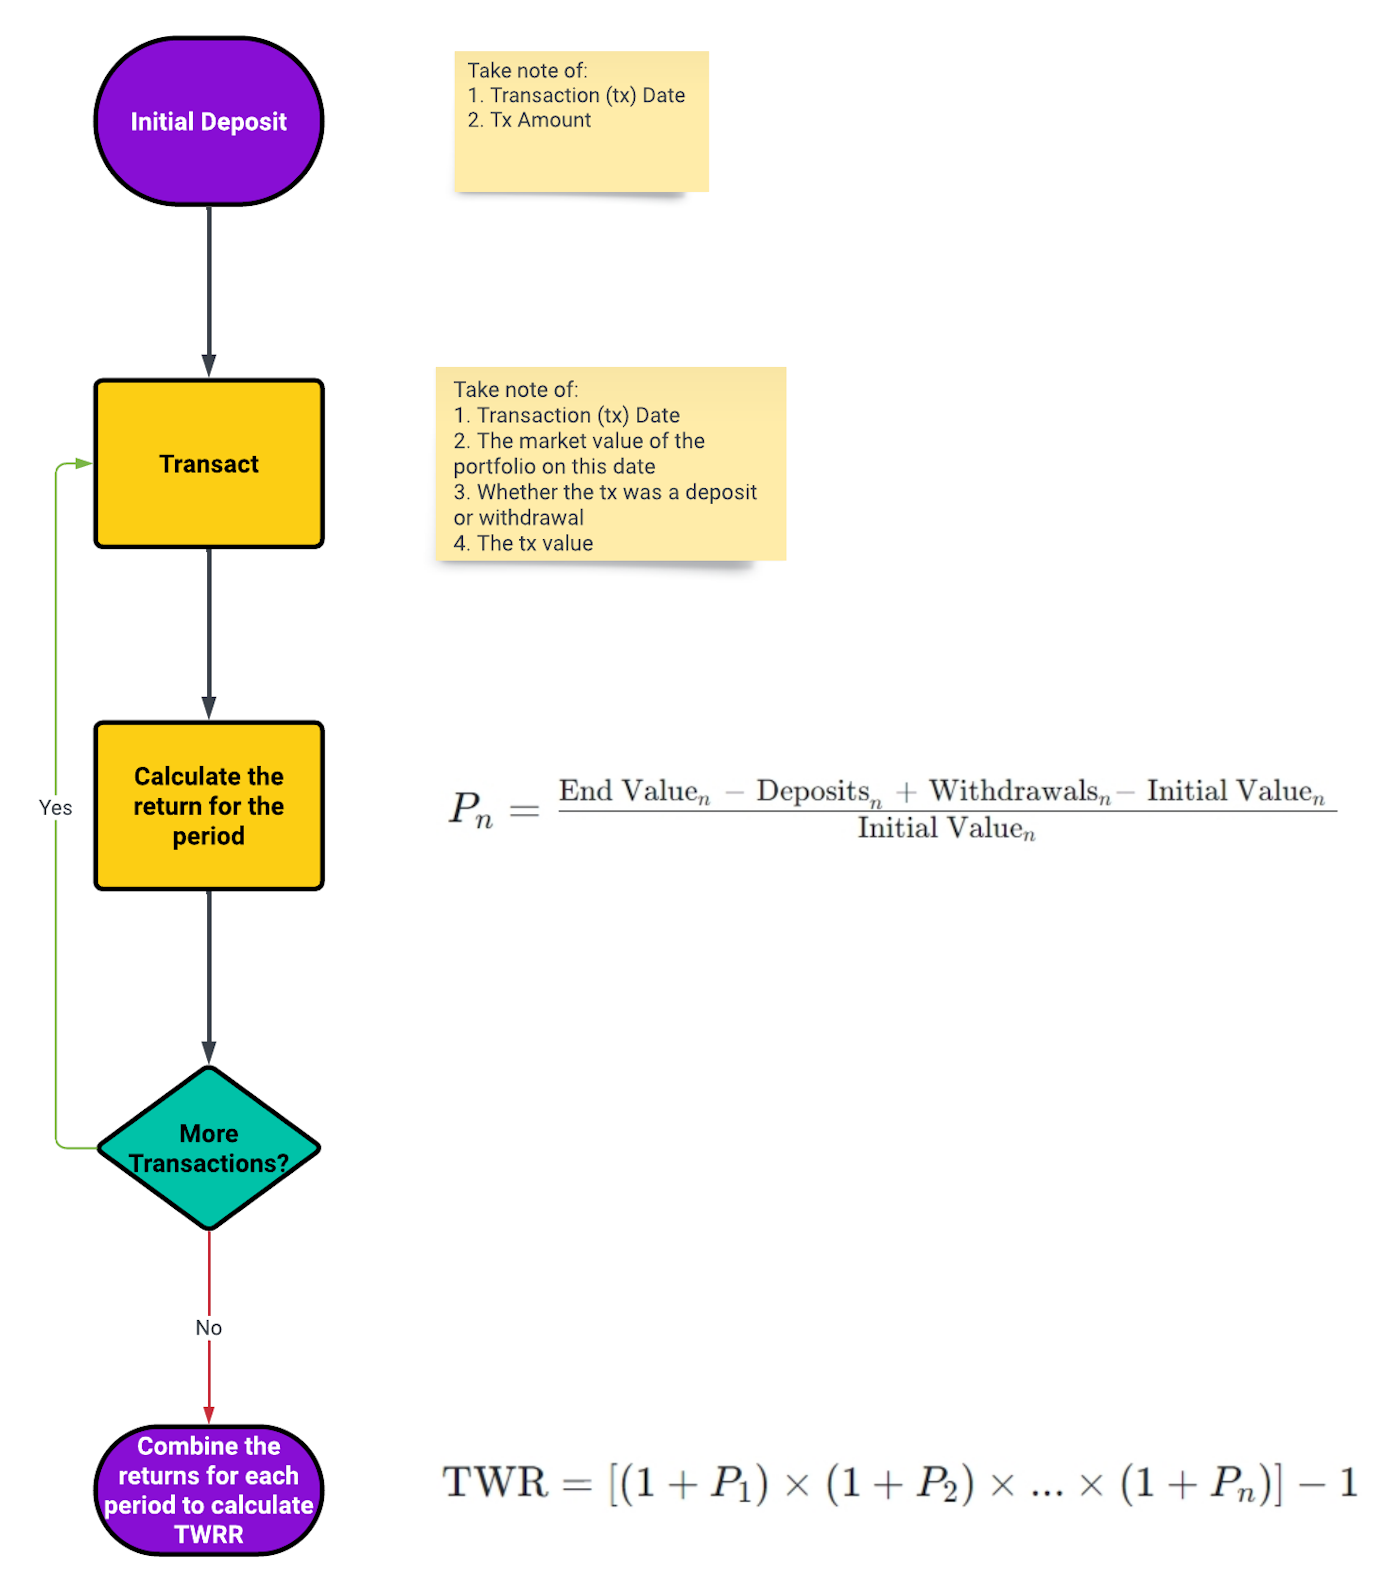 Flowchart showing the process to calculate the time-weighted rate of return